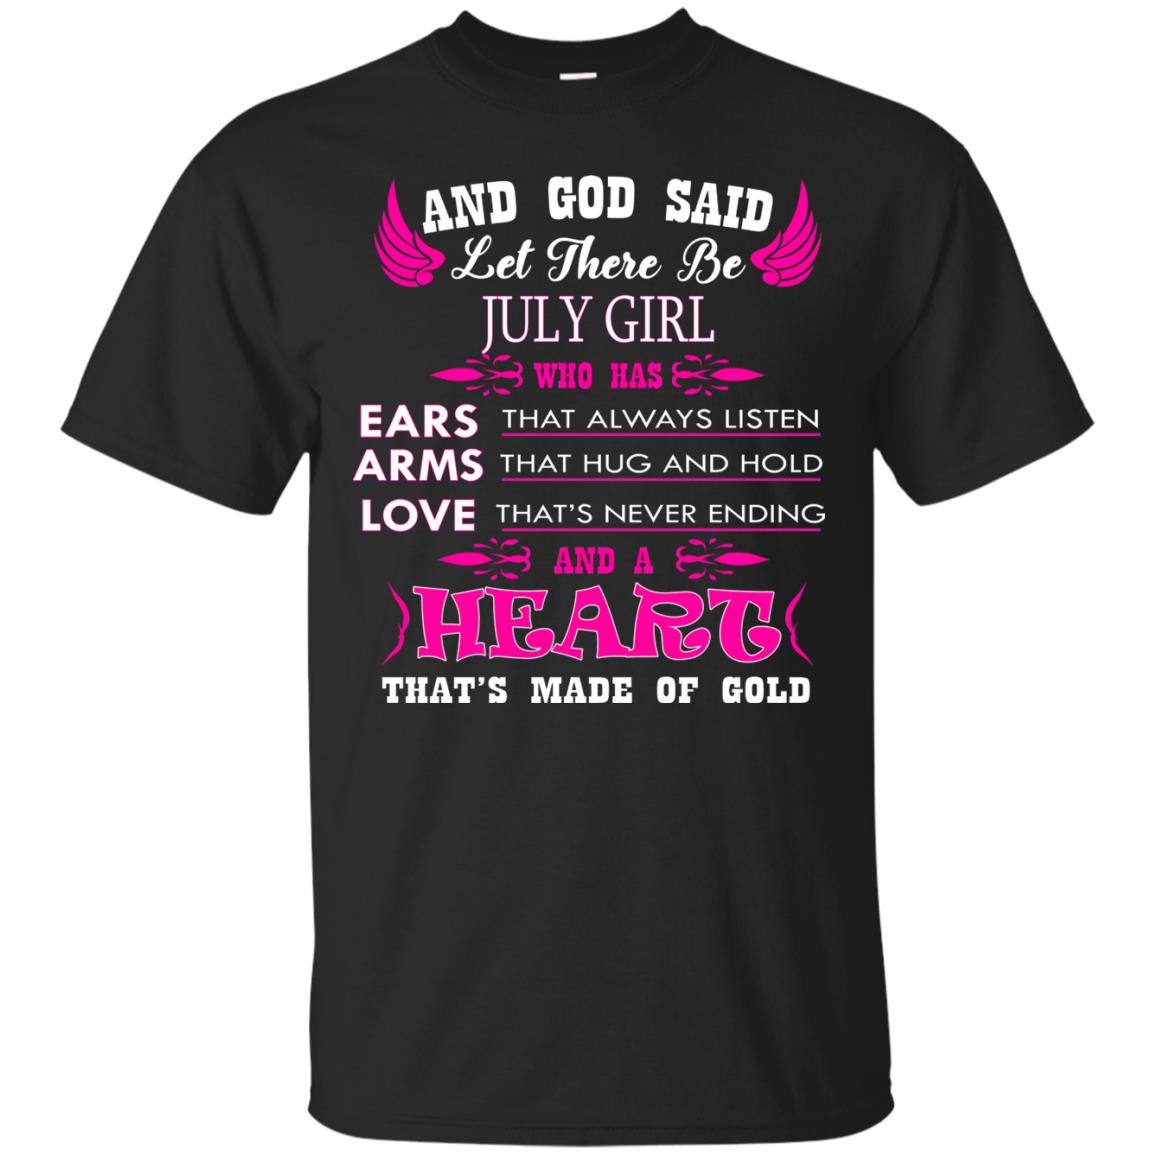 And God Said Let There Be July Girl Who Has Ears - Arms - Love Shirt